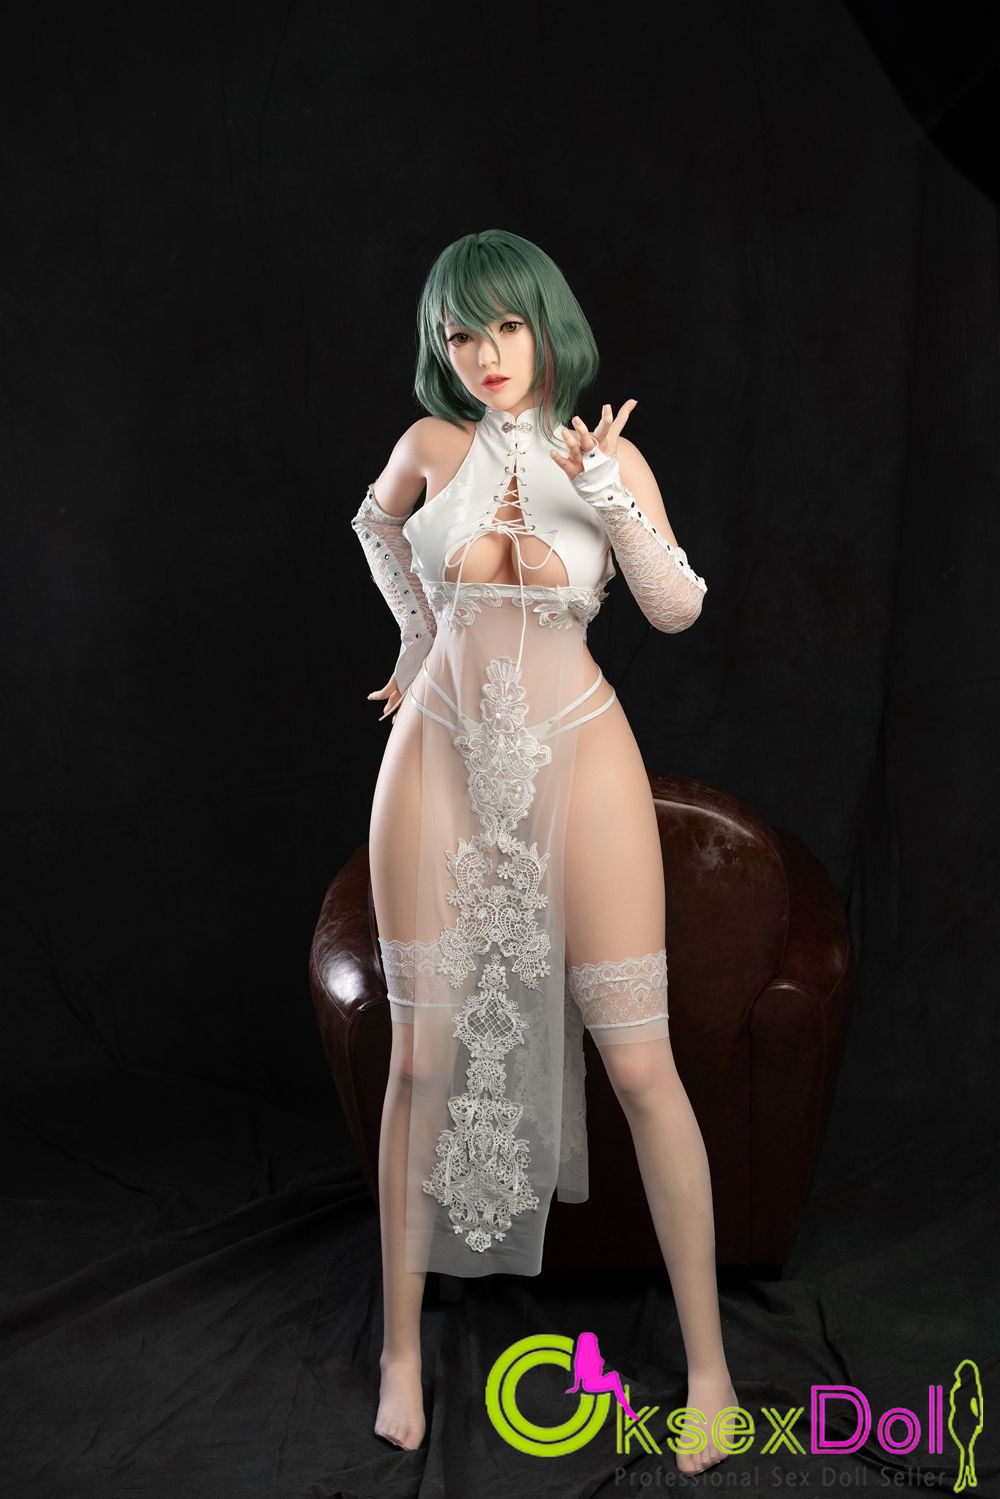 Green Hair sex dolls images